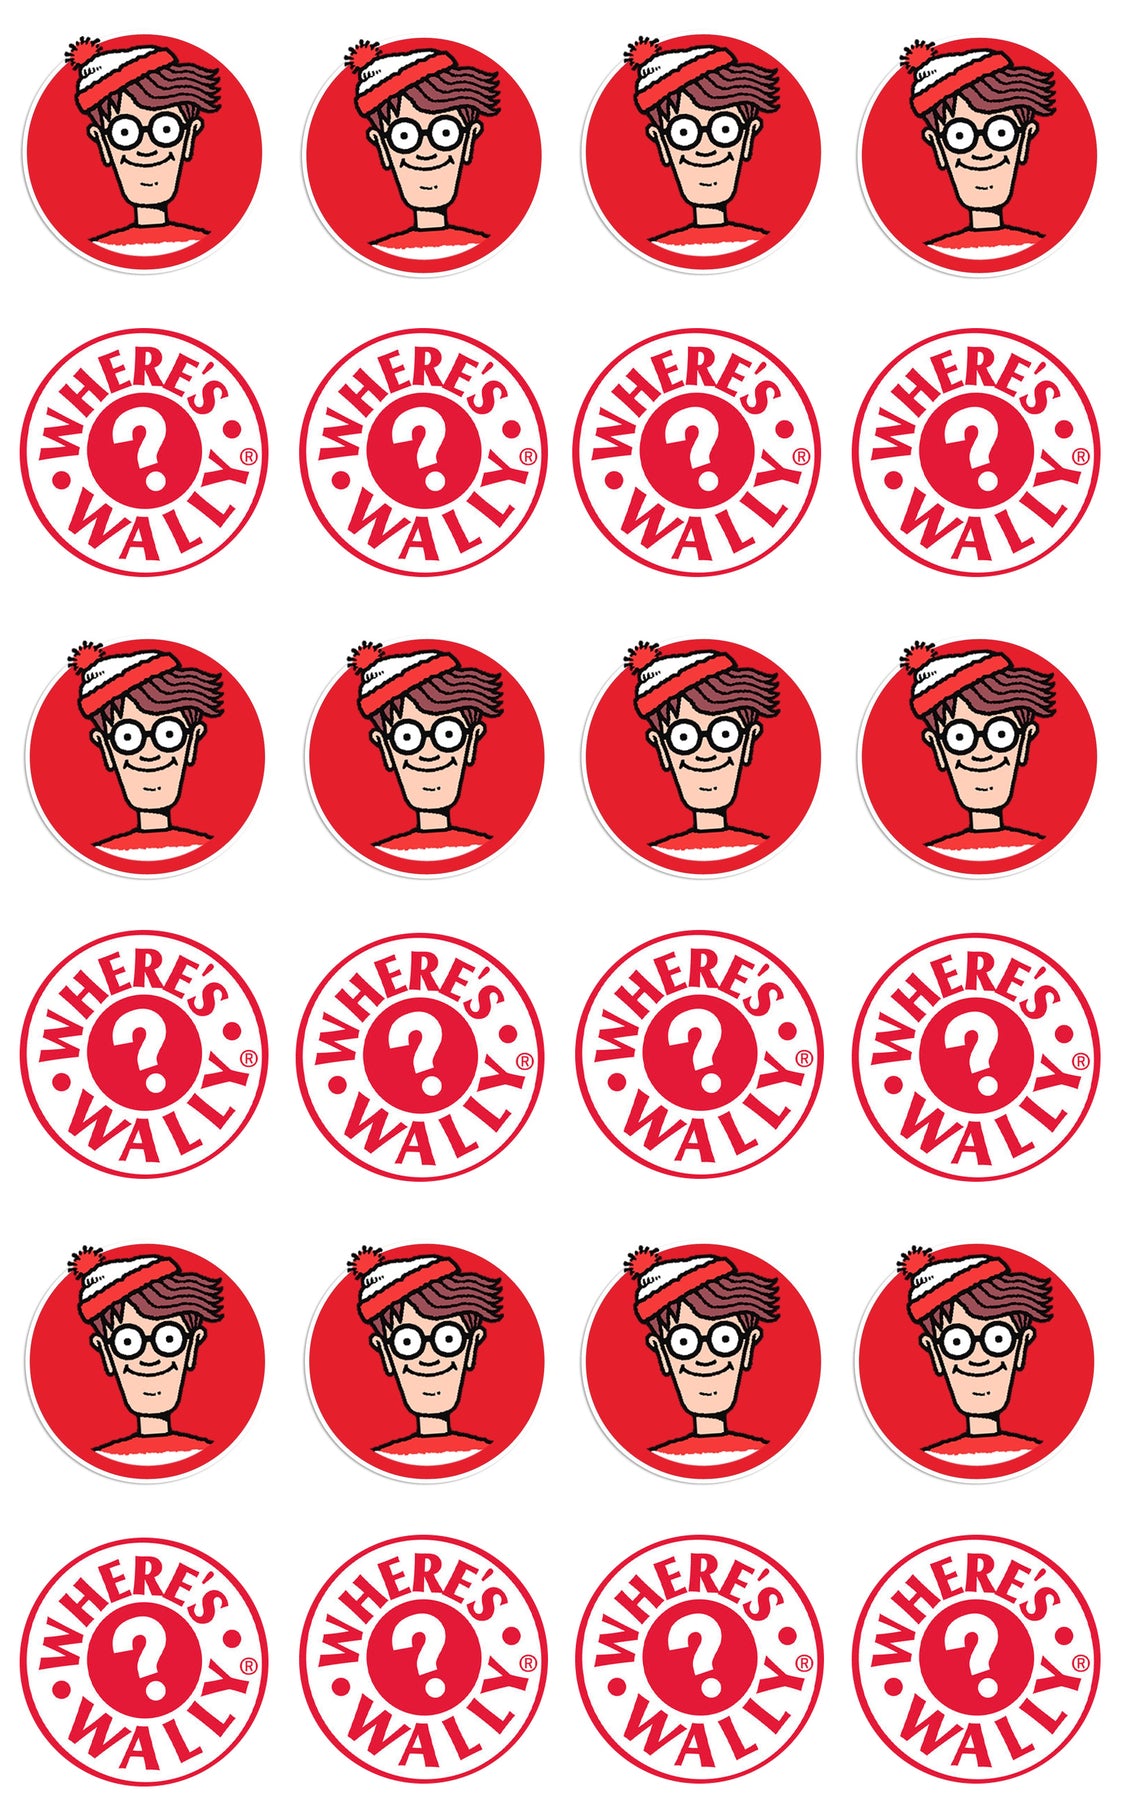 Where's Wally Red Background Question Marks Edible Cupcake Topper Images ABPID08232